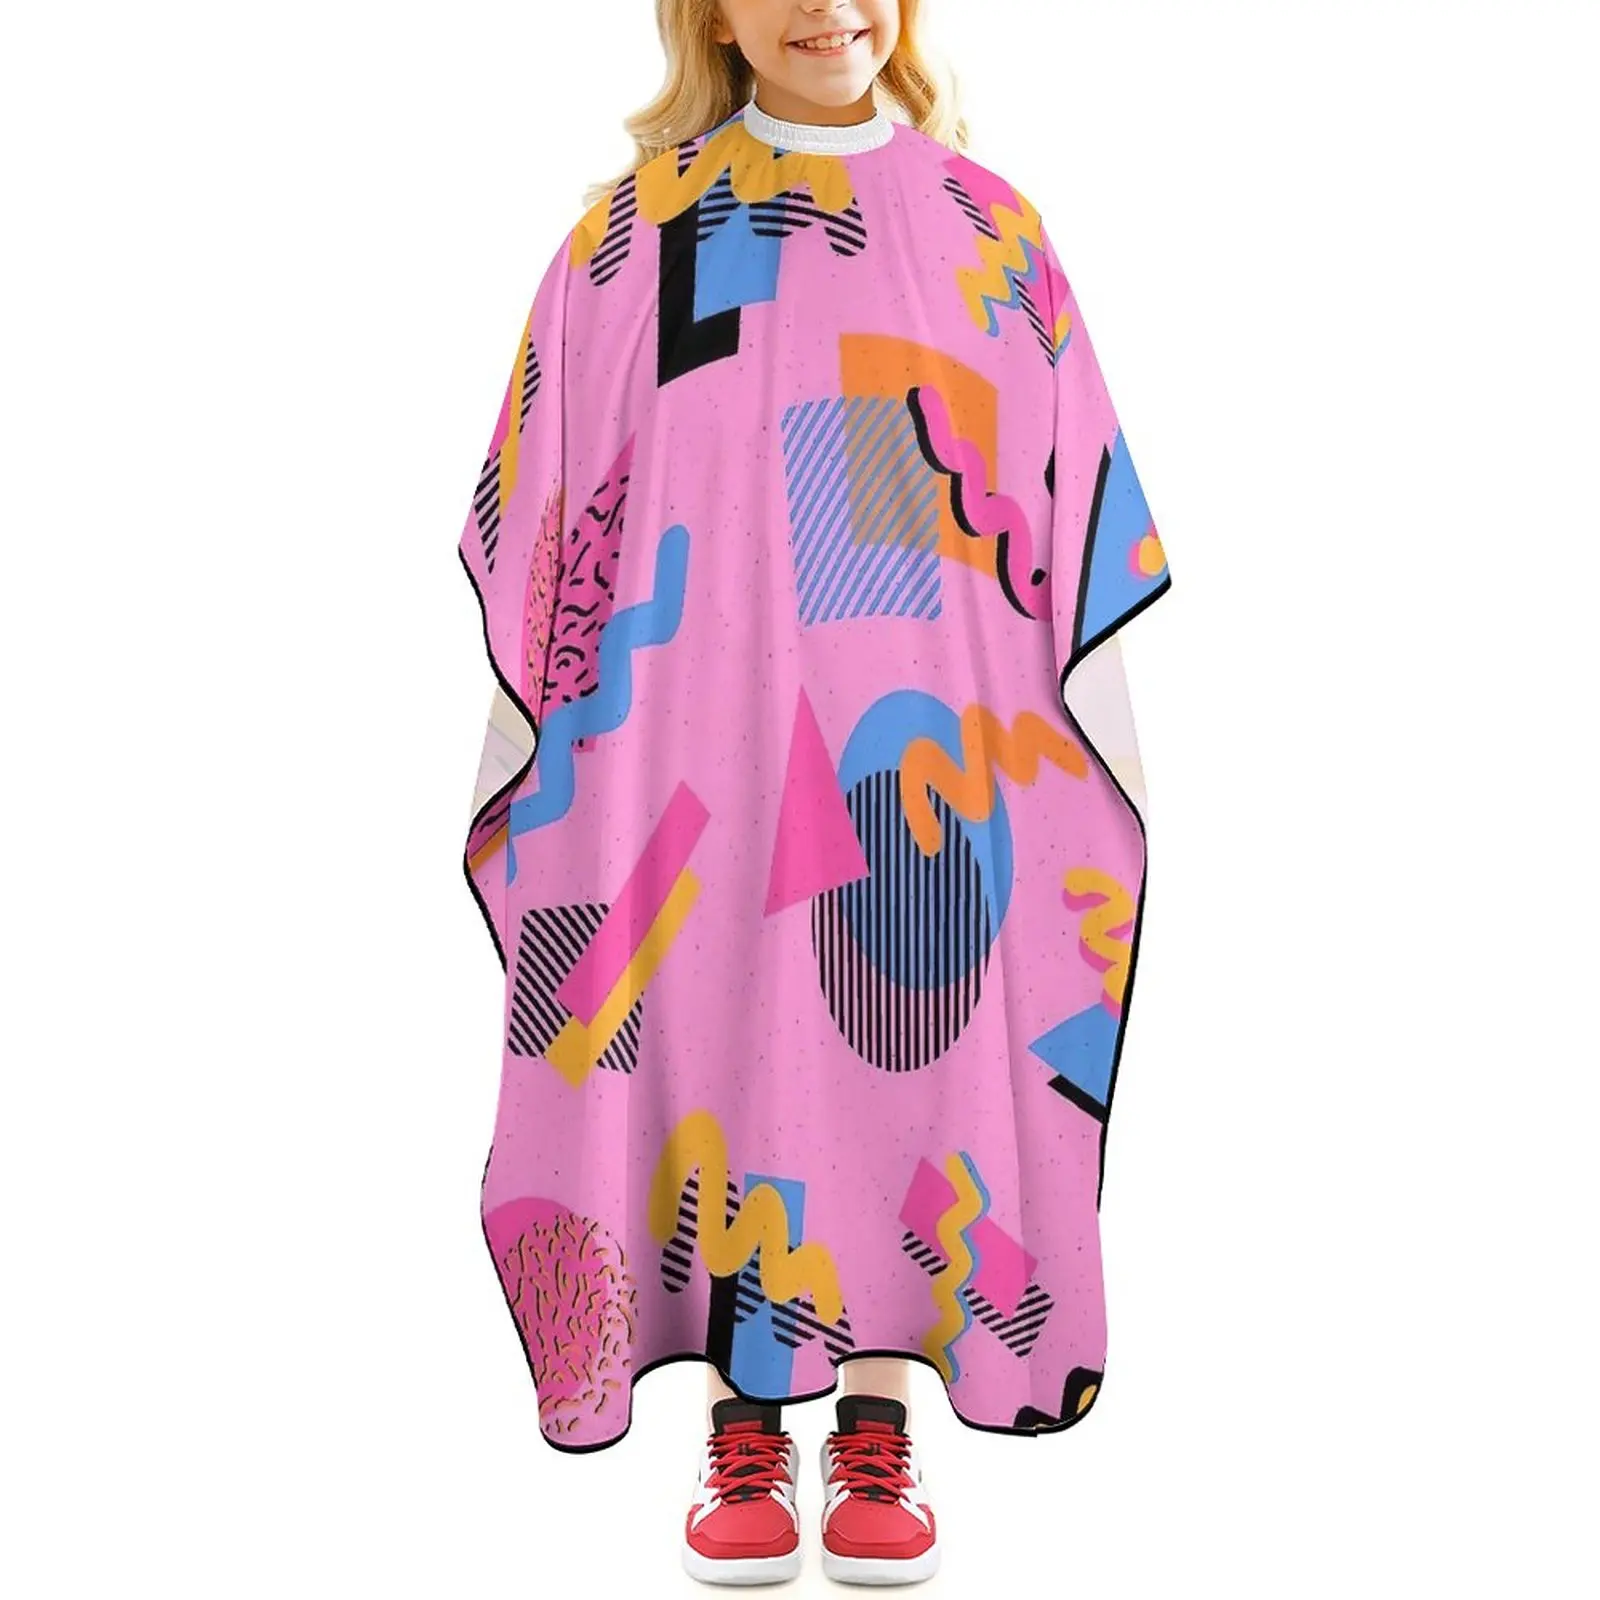 

Haircut Salon Hairdressing Cape for Kids Child Polyester Smock Cover Waterproof Shampoo Cutting Household Capes Memphis Pattern